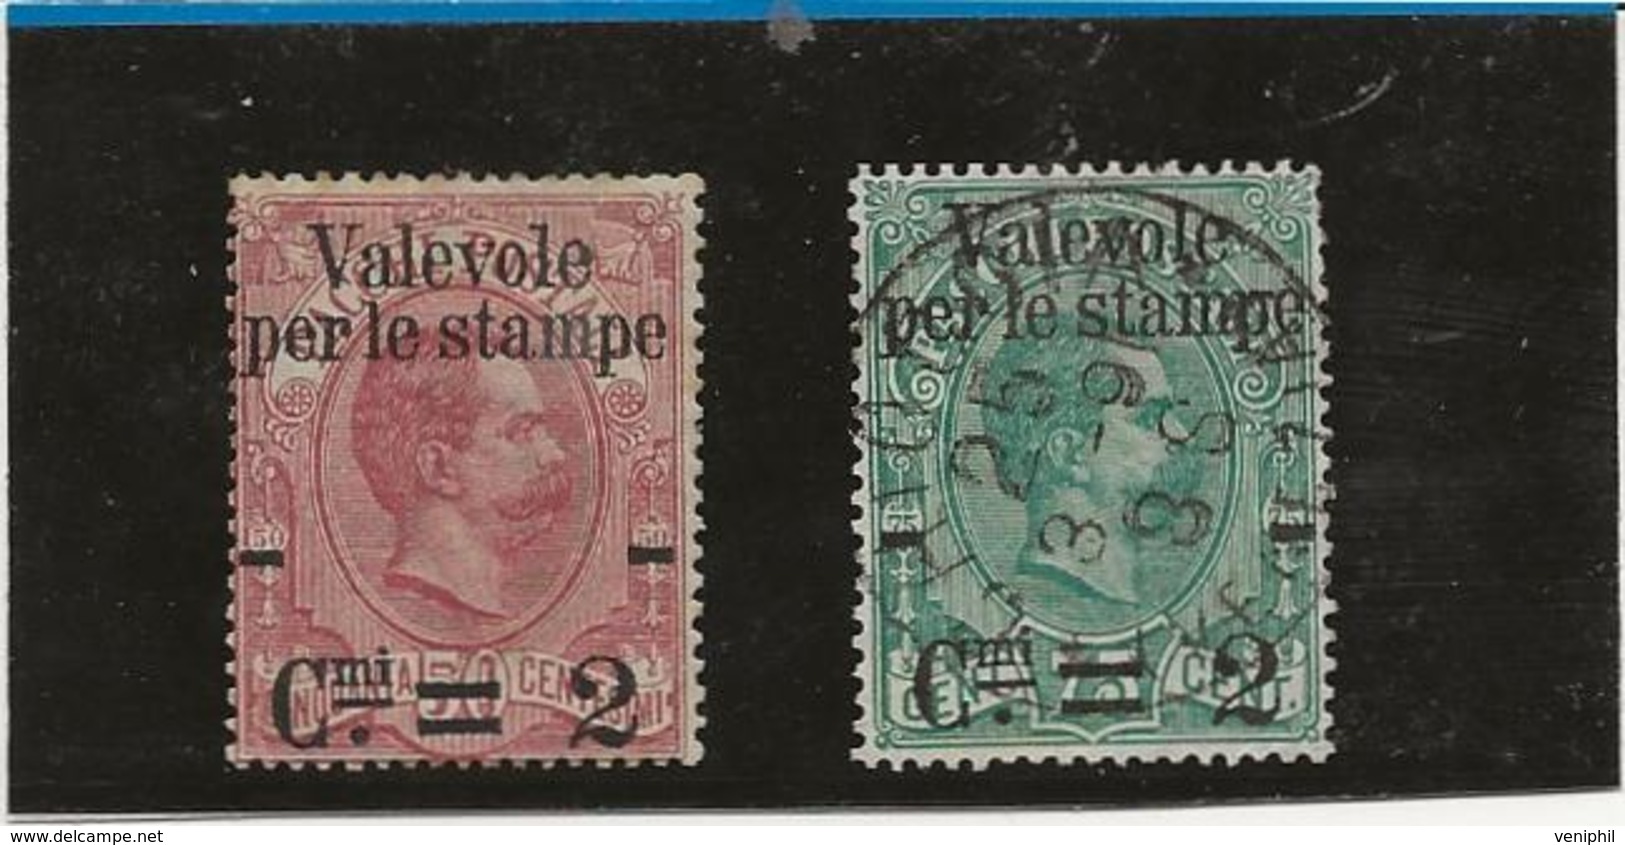 TIMBRES N° 48 NEUF S GOMME + N° 49 OBLITERE - ANNEE 1890 - COTE : 40 € - Oblitérés